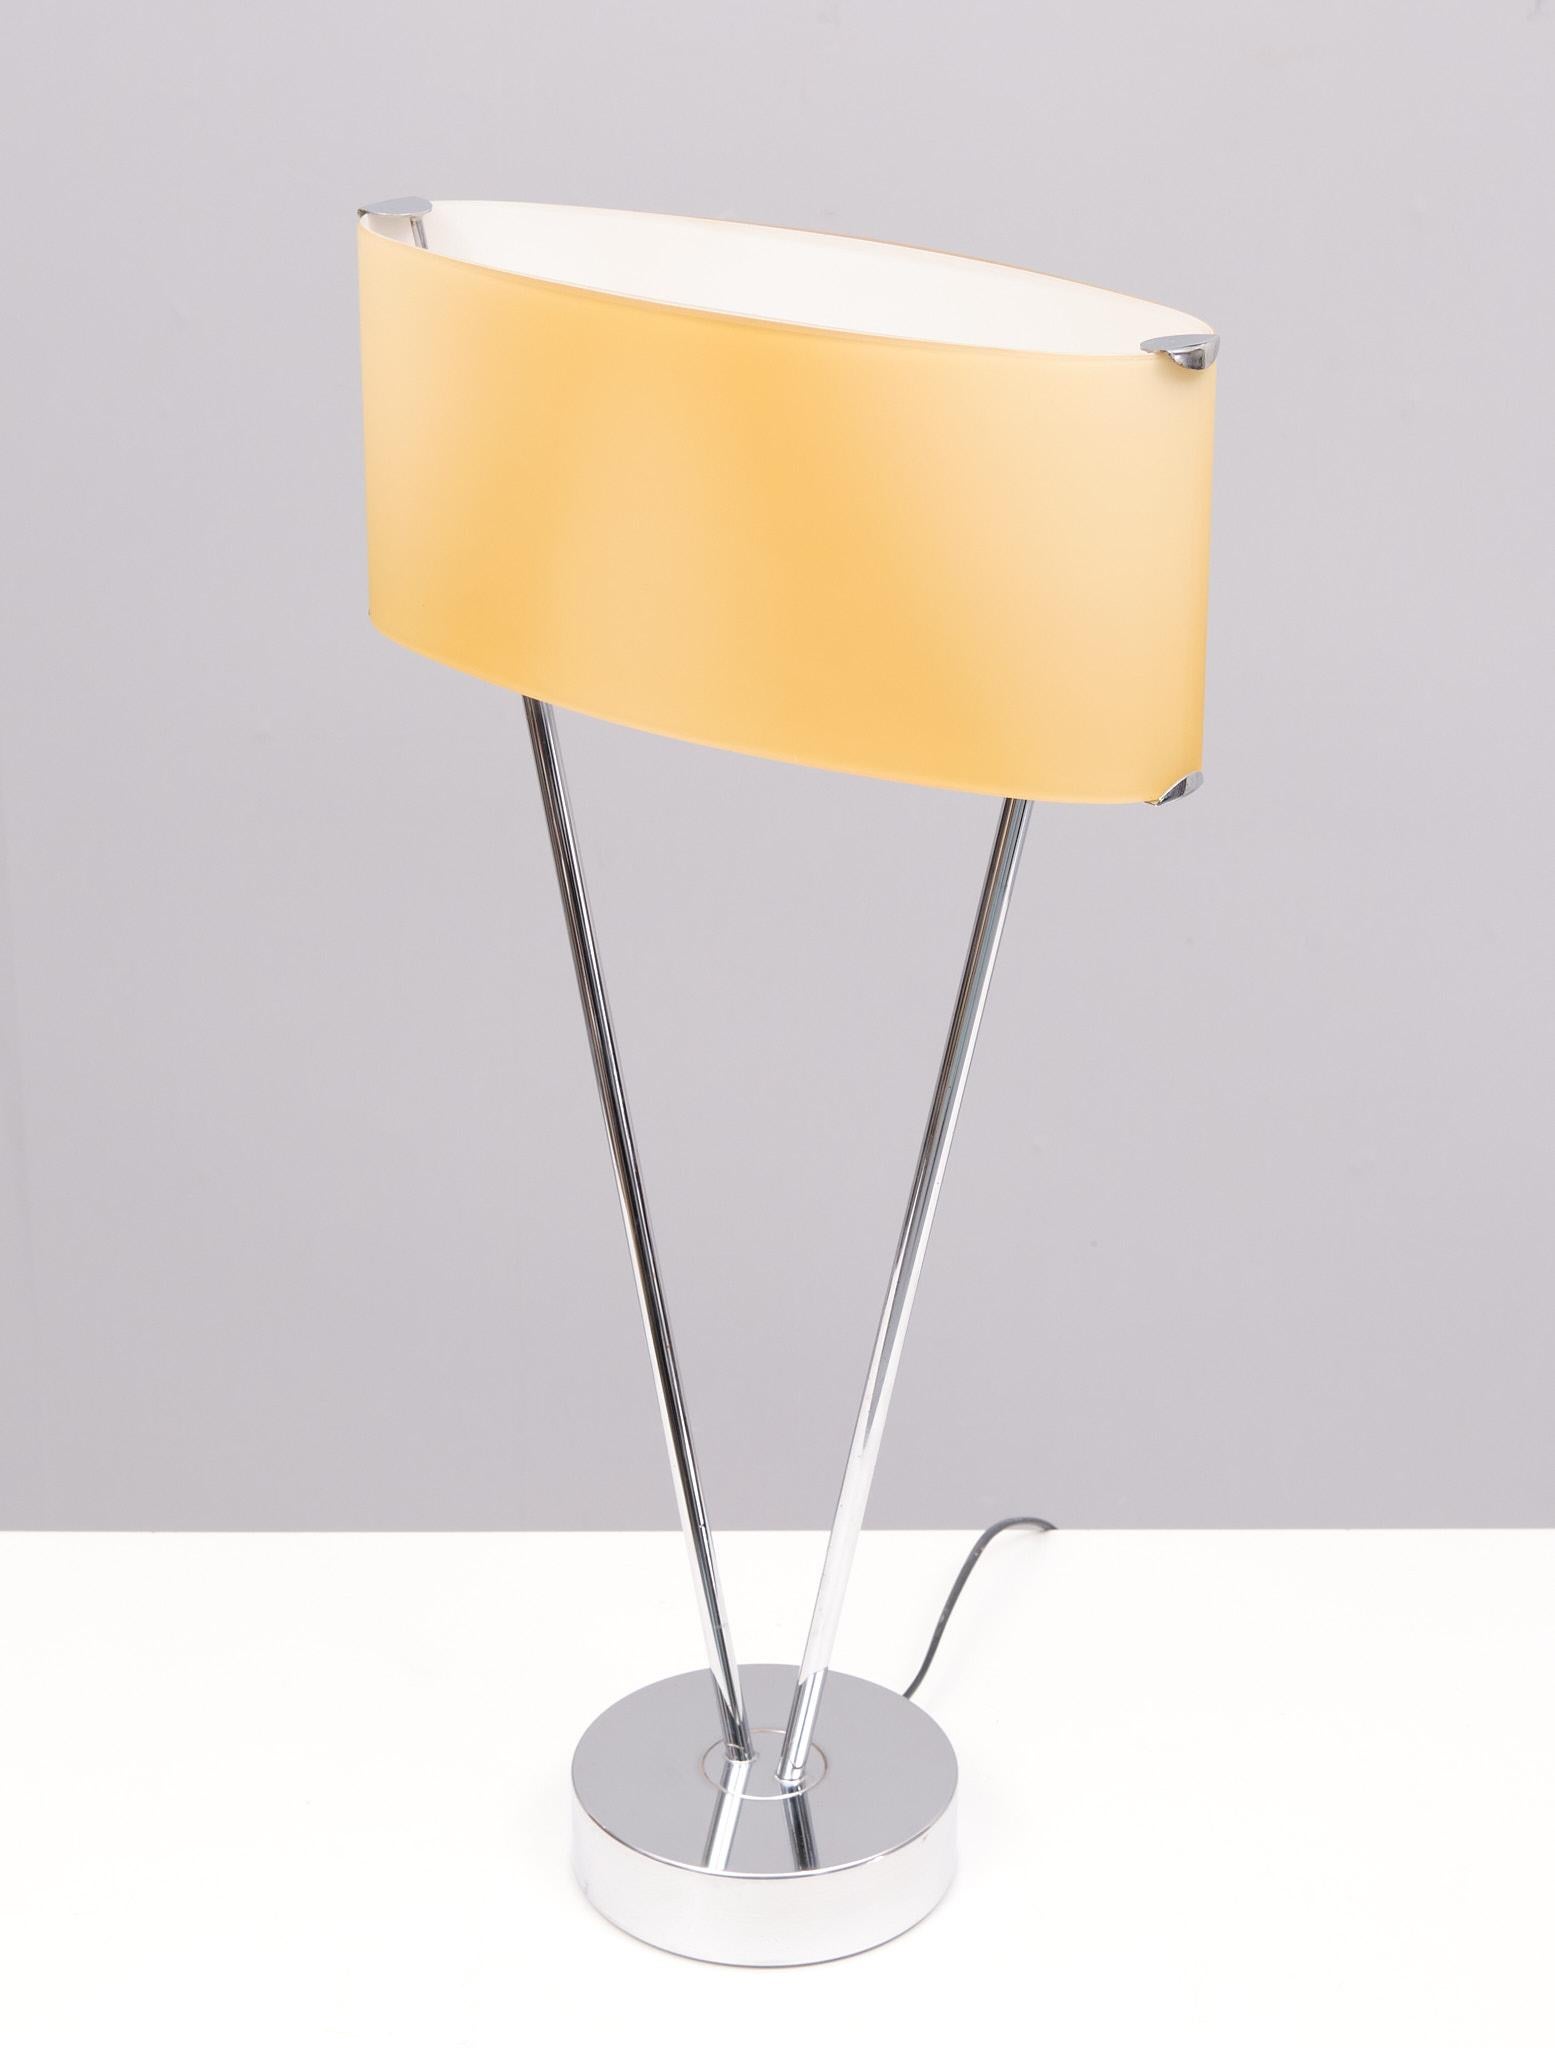 Late 20th Century “Vittoria” Table Lamp by Toso, Massari & Associates for Leucos  Italy, 1990s For Sale